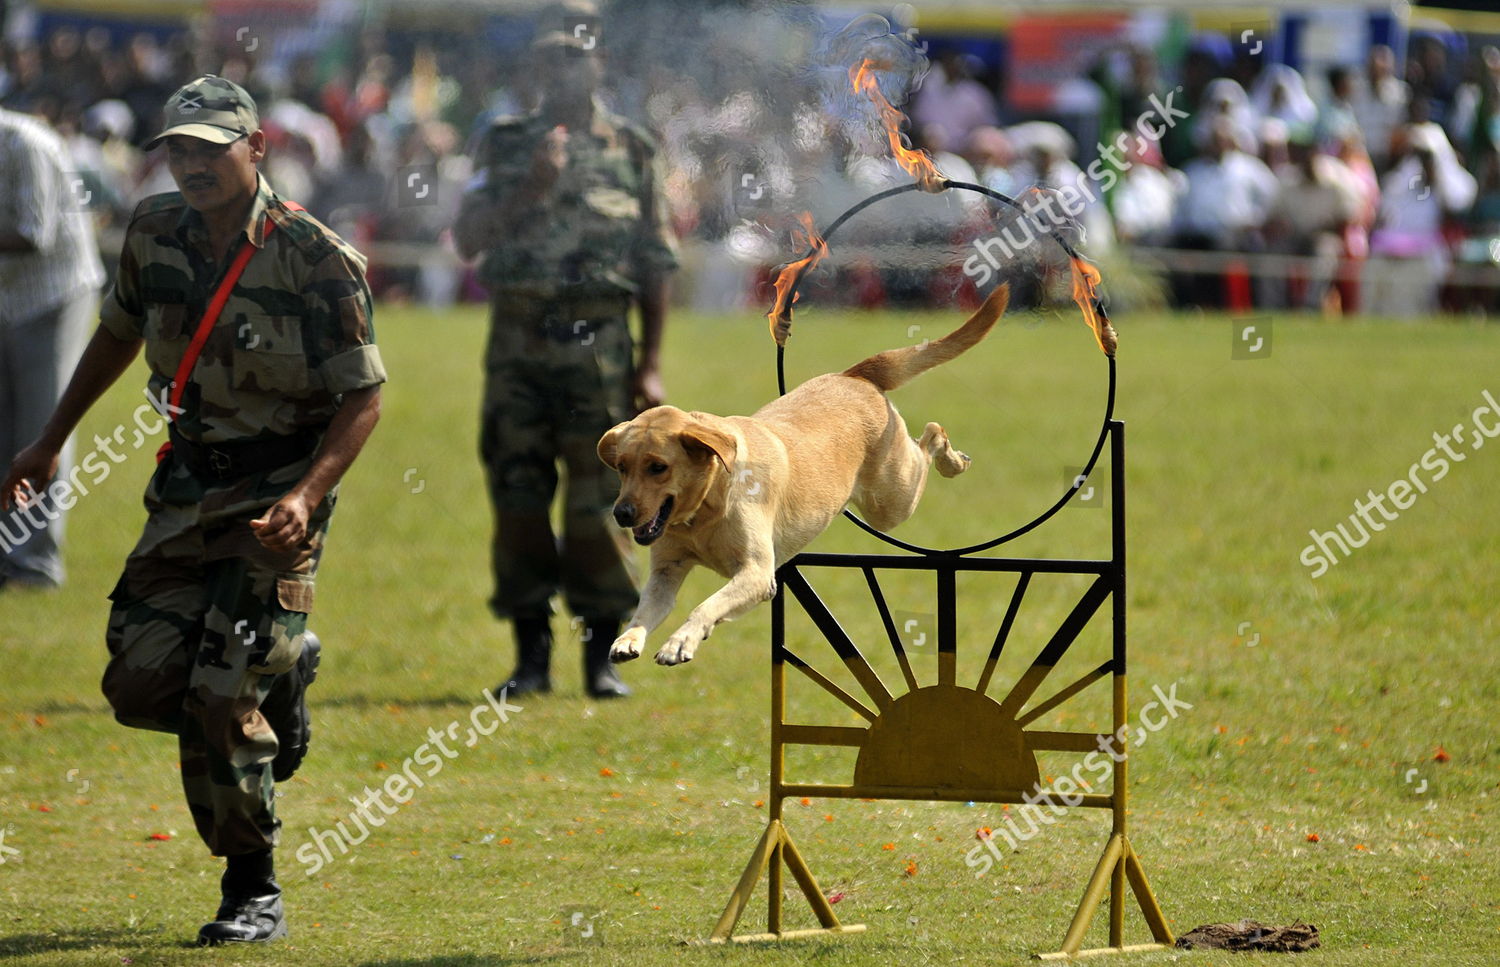 indian army dogs